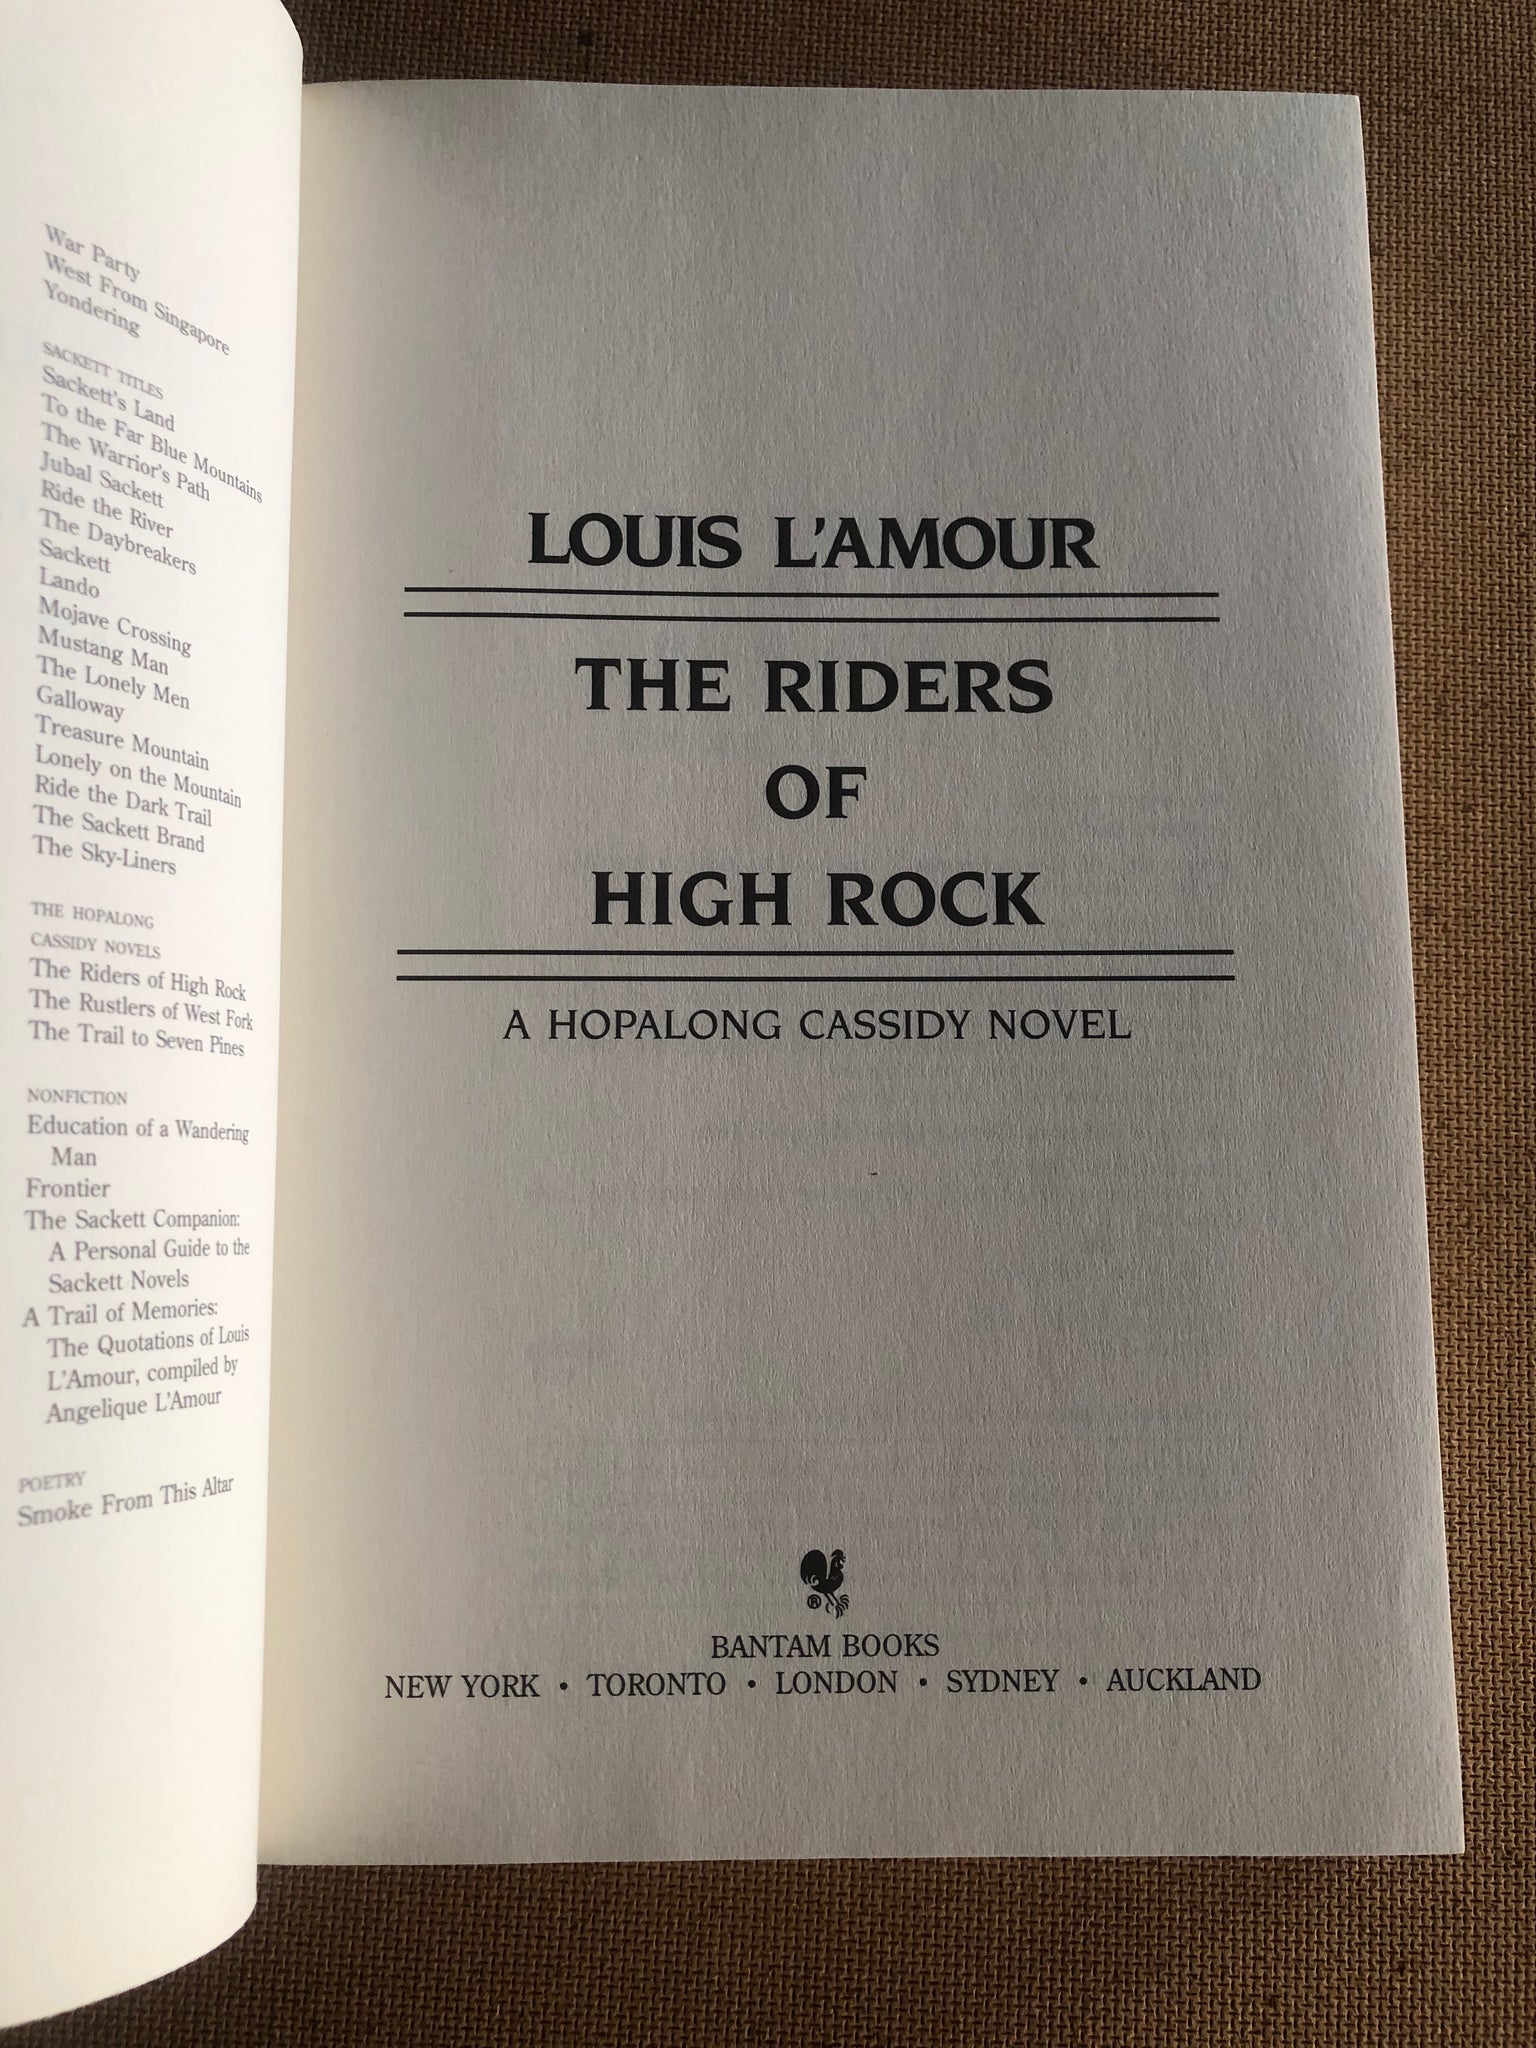 The Lonely Men by Louis L'amour From the Louis L'amour 